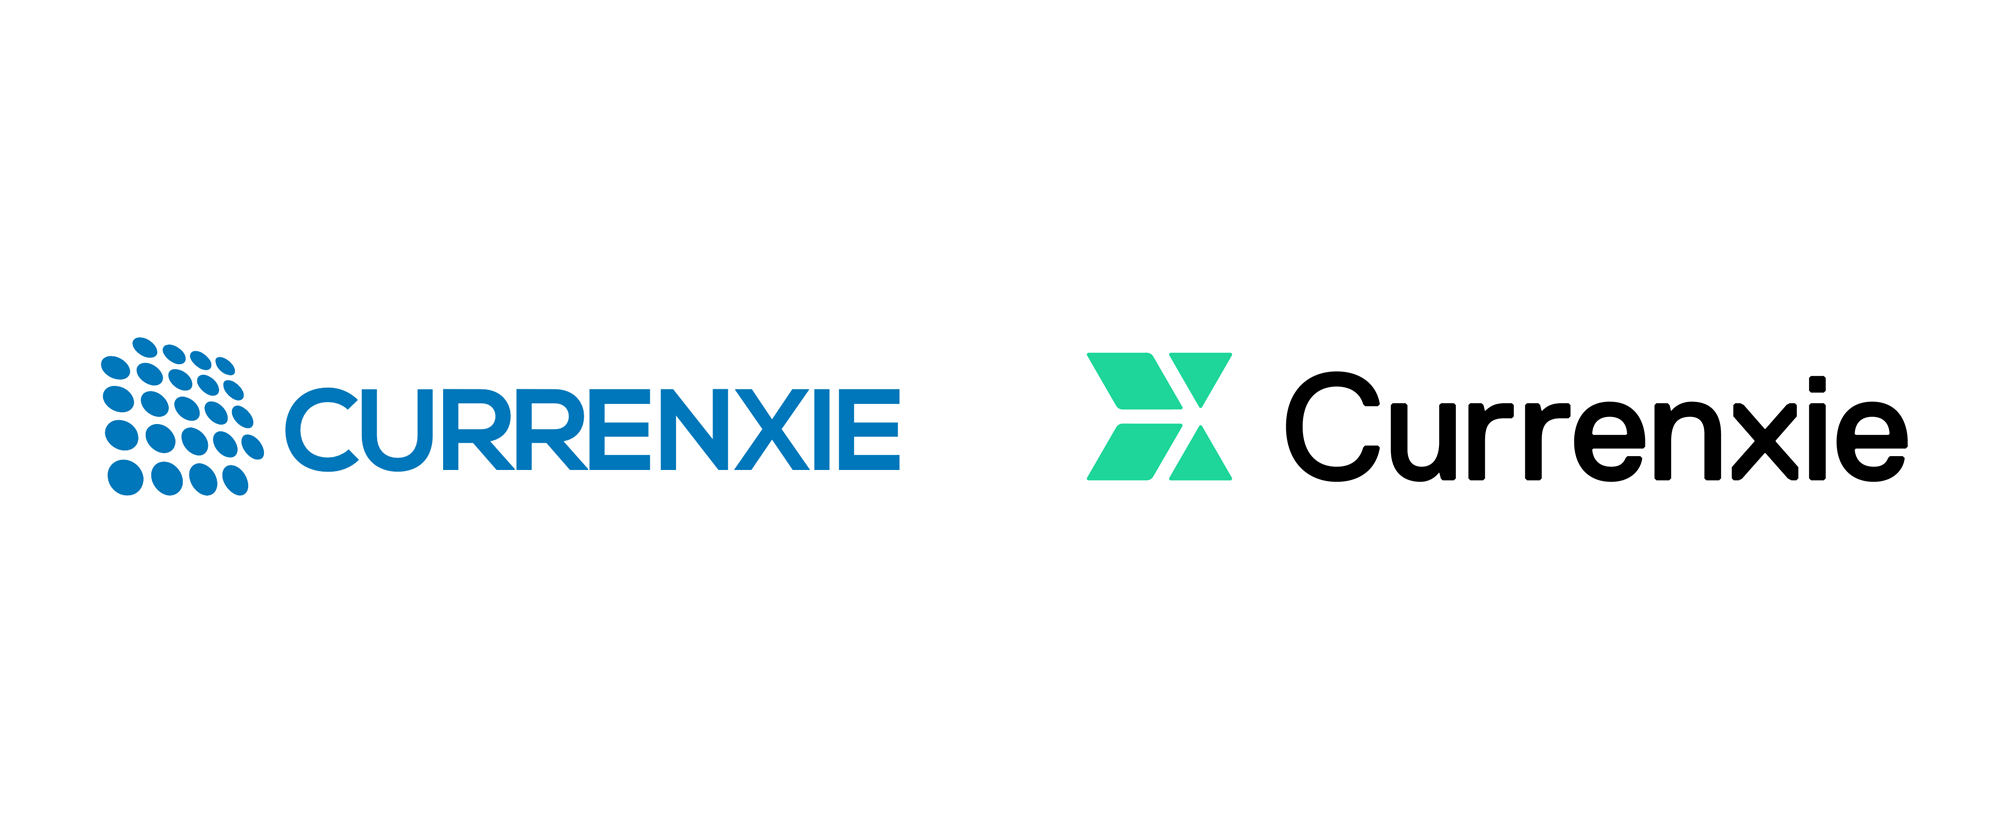 New Logo for Currenxie by J.D. Reeves